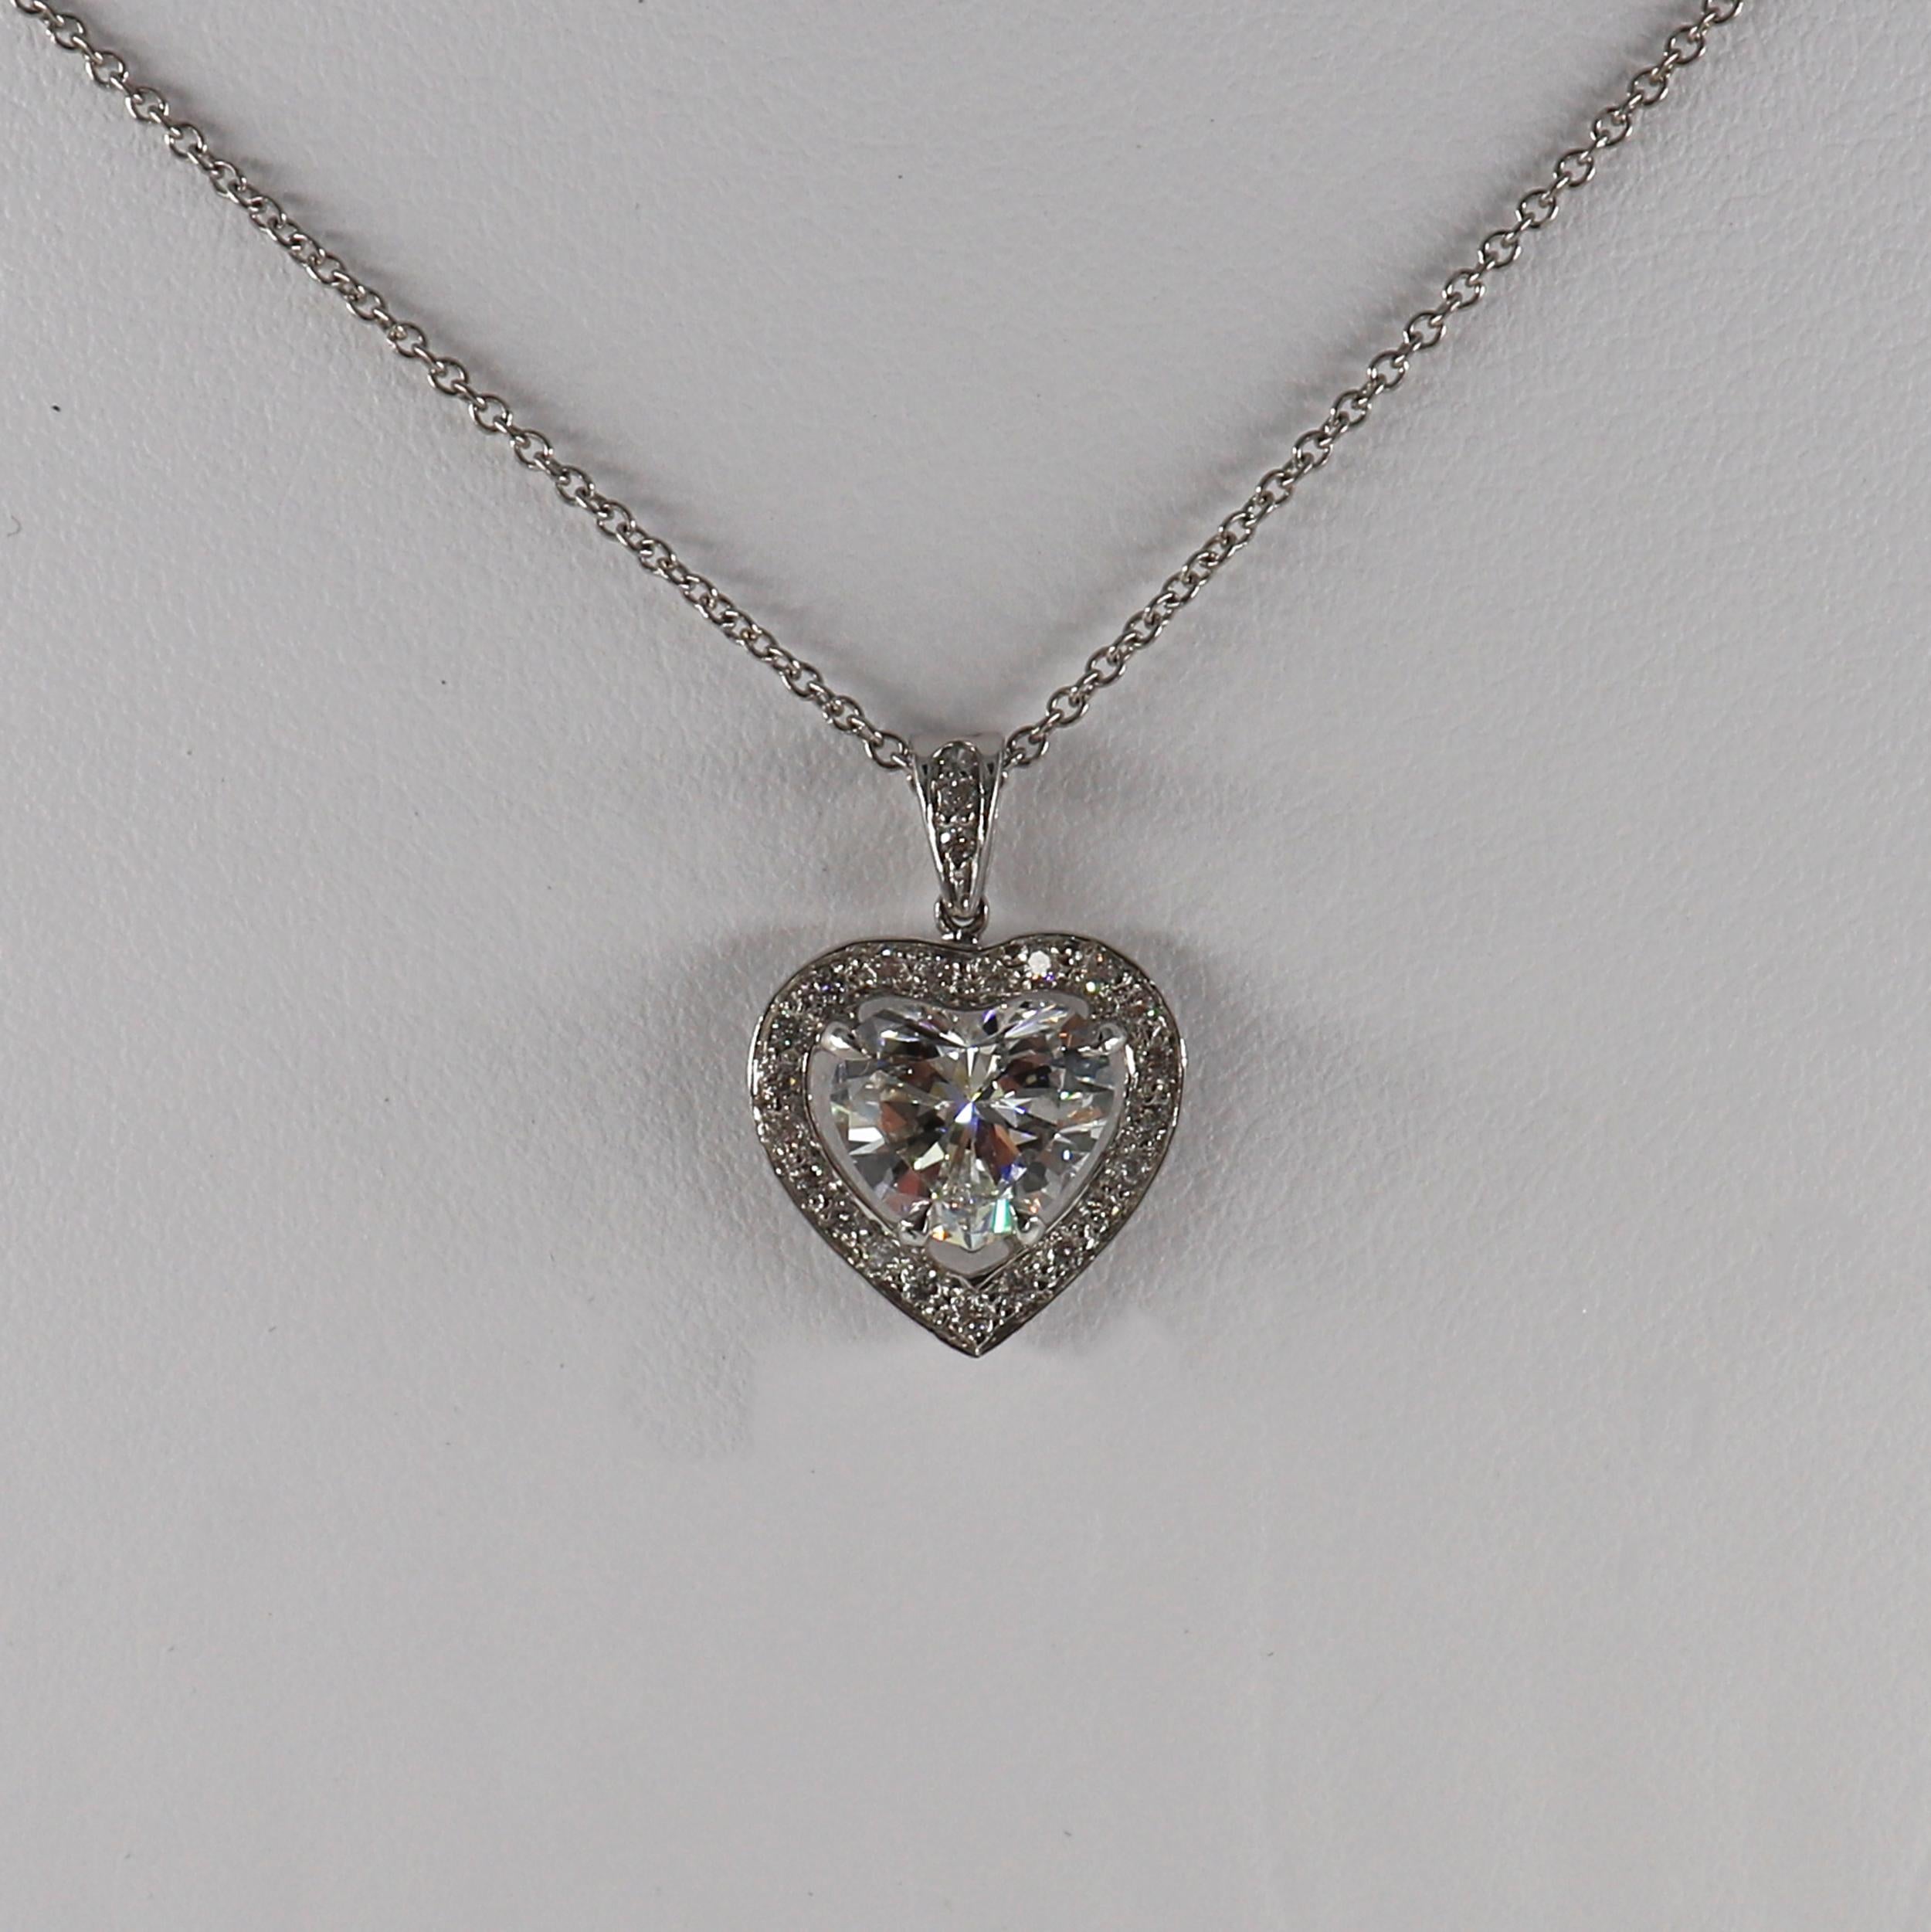 This J. Birnbach Heart-Shaped Diamond surrounded by a pave halo necklace will be the perfect gift for your sweetheart! This necklace is crafted in 18 karat White Gold and features a GIA Certified Heart-Shaped 1.52 carat diamond with a G color and